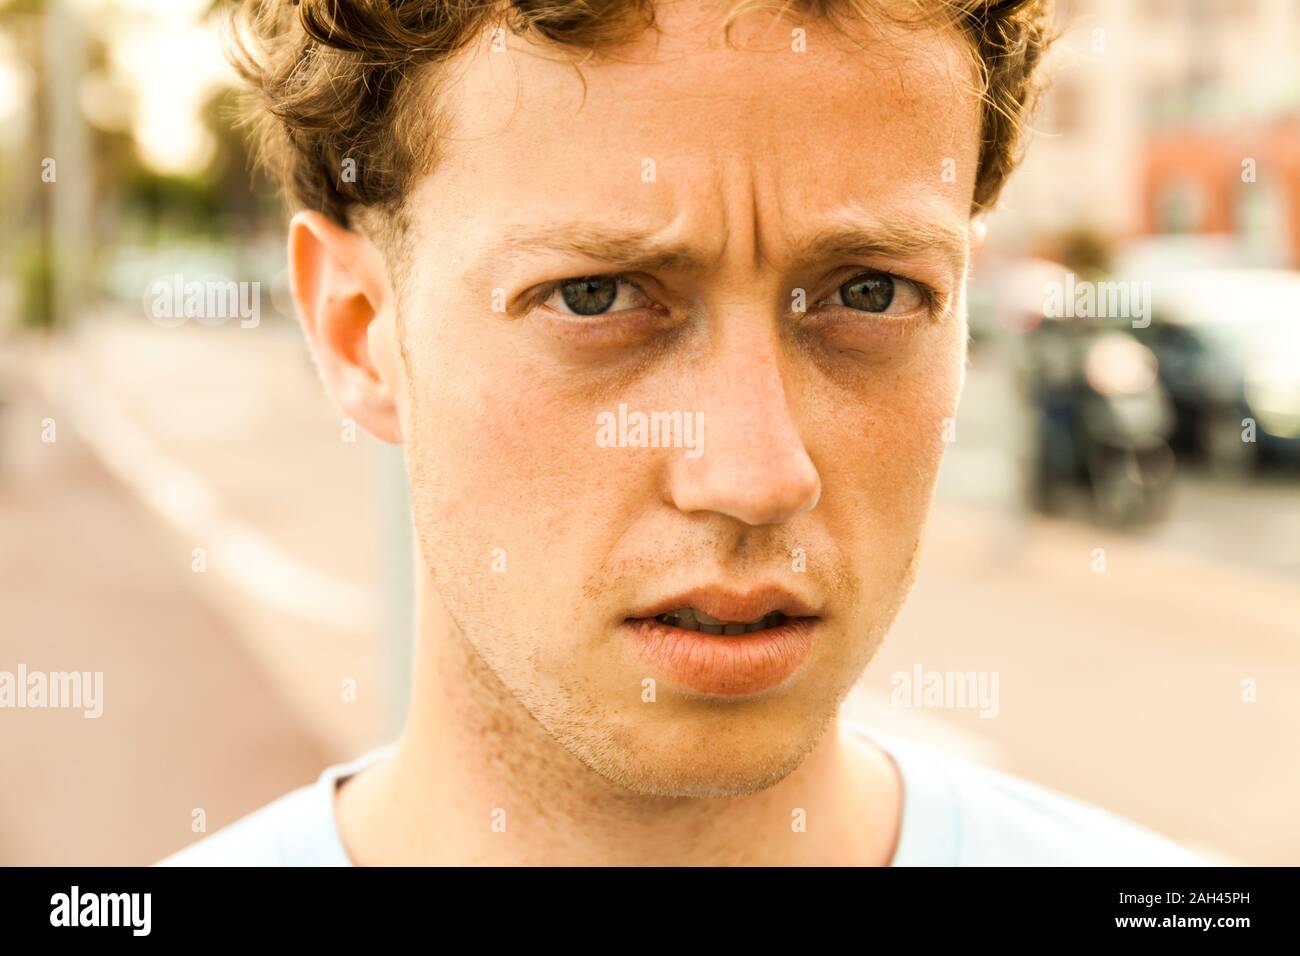 Portrait of sceptical young strawberry blonde man Stock Photo